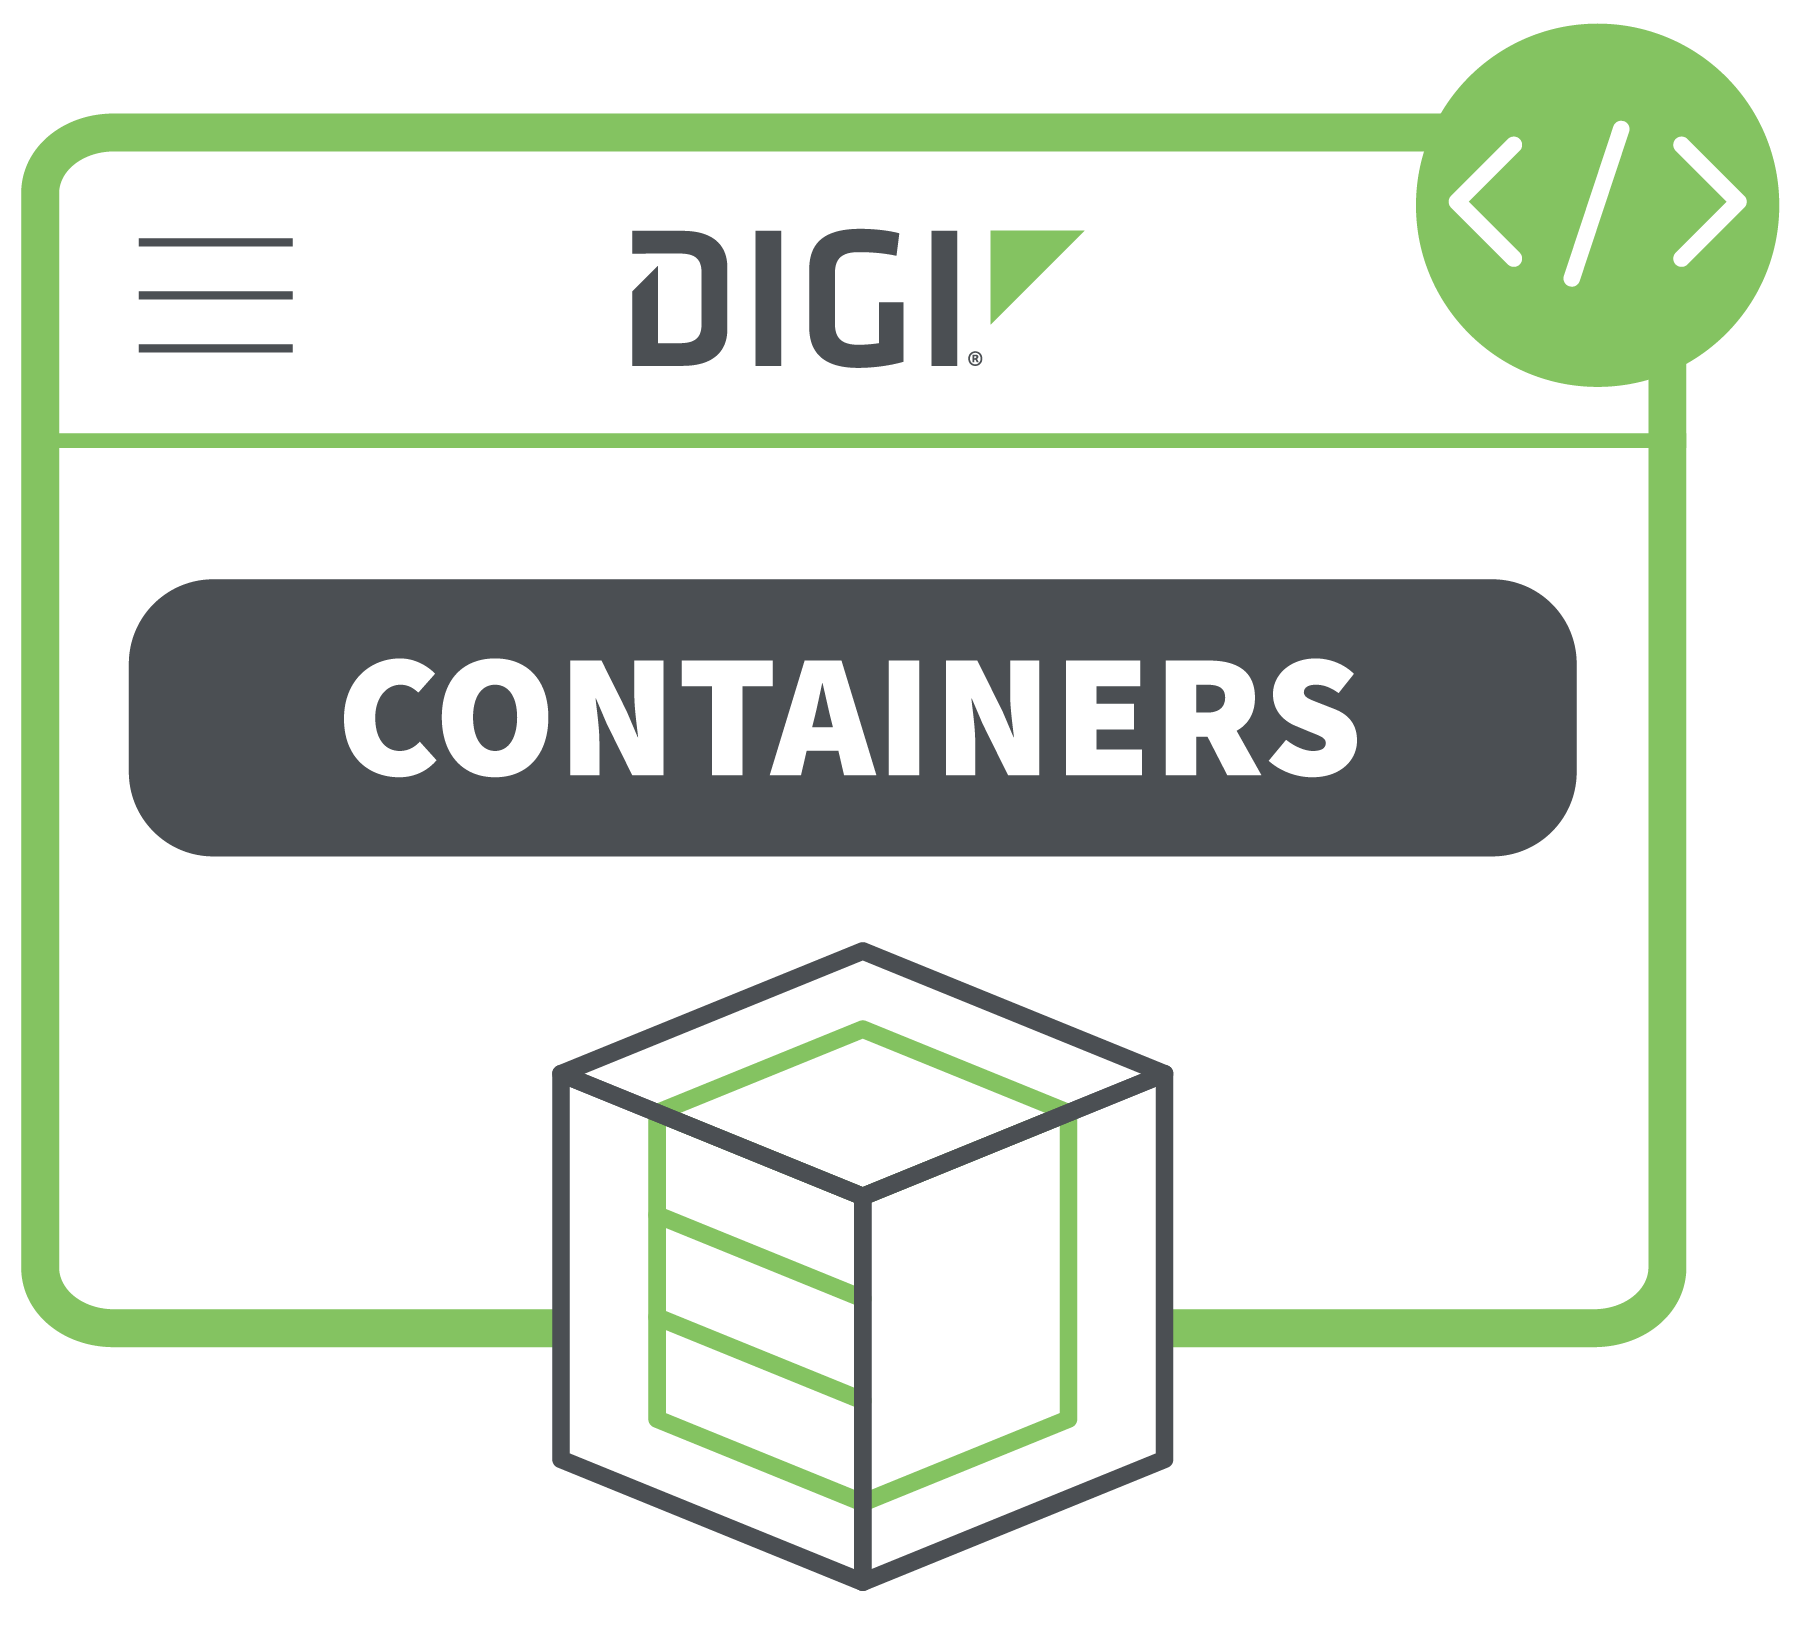 Digi Containers Ausweis